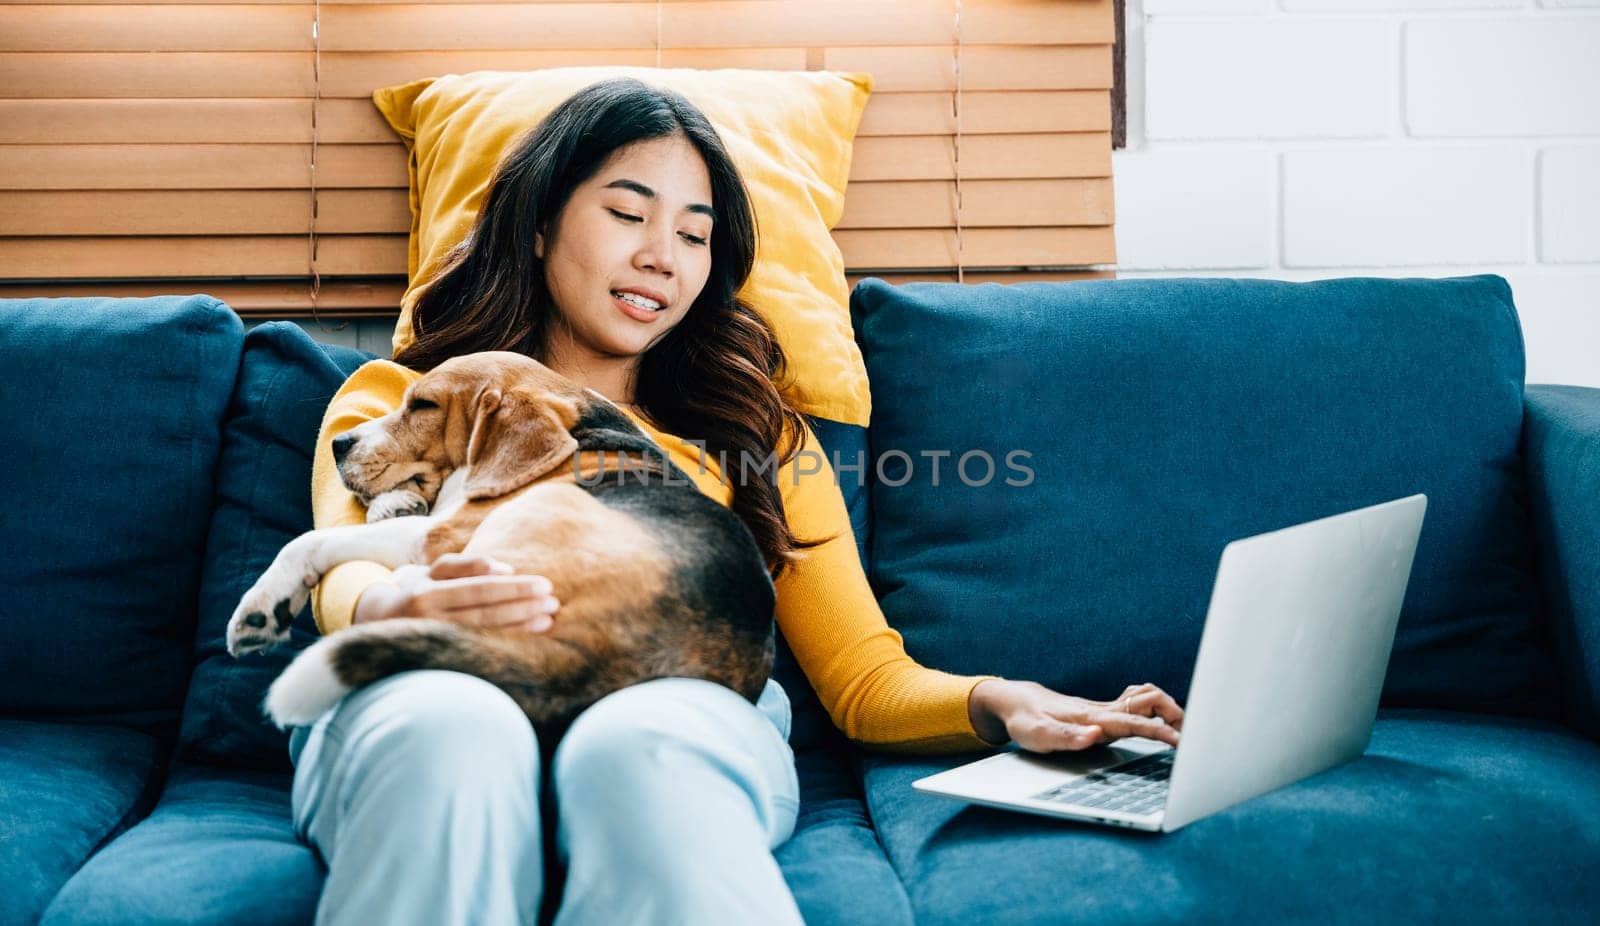 A pretty young woman, working on her laptop at home on the sofa, smiles as her loyal Beagle dog sleeps beside her. Their friendly bond and togetherness make working from home a joy. Friendly Dog.